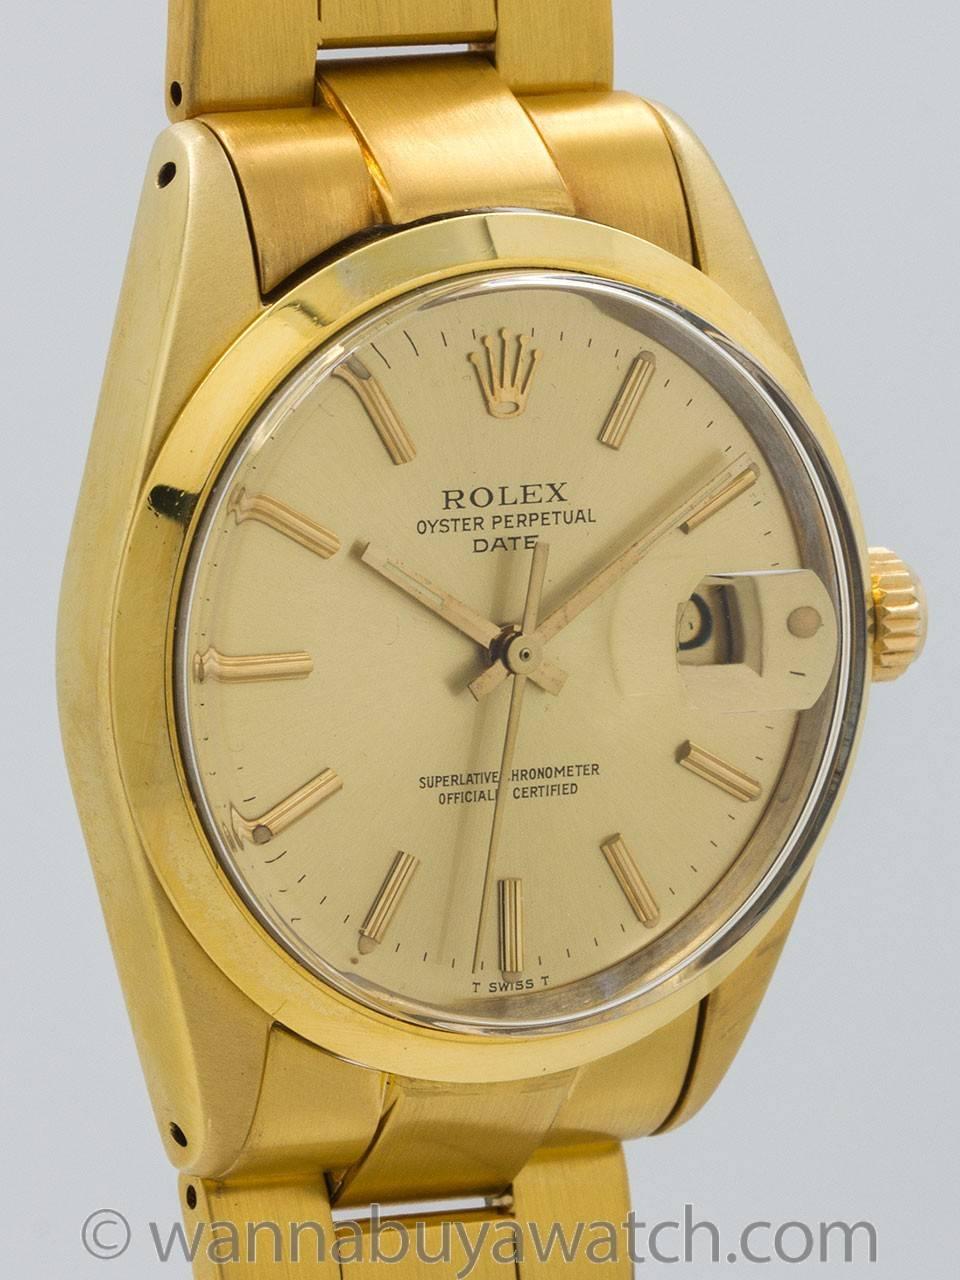 Modern Rolex Gold Shell Oyster Perpetual Date Automatic Wristwatch circa 1979